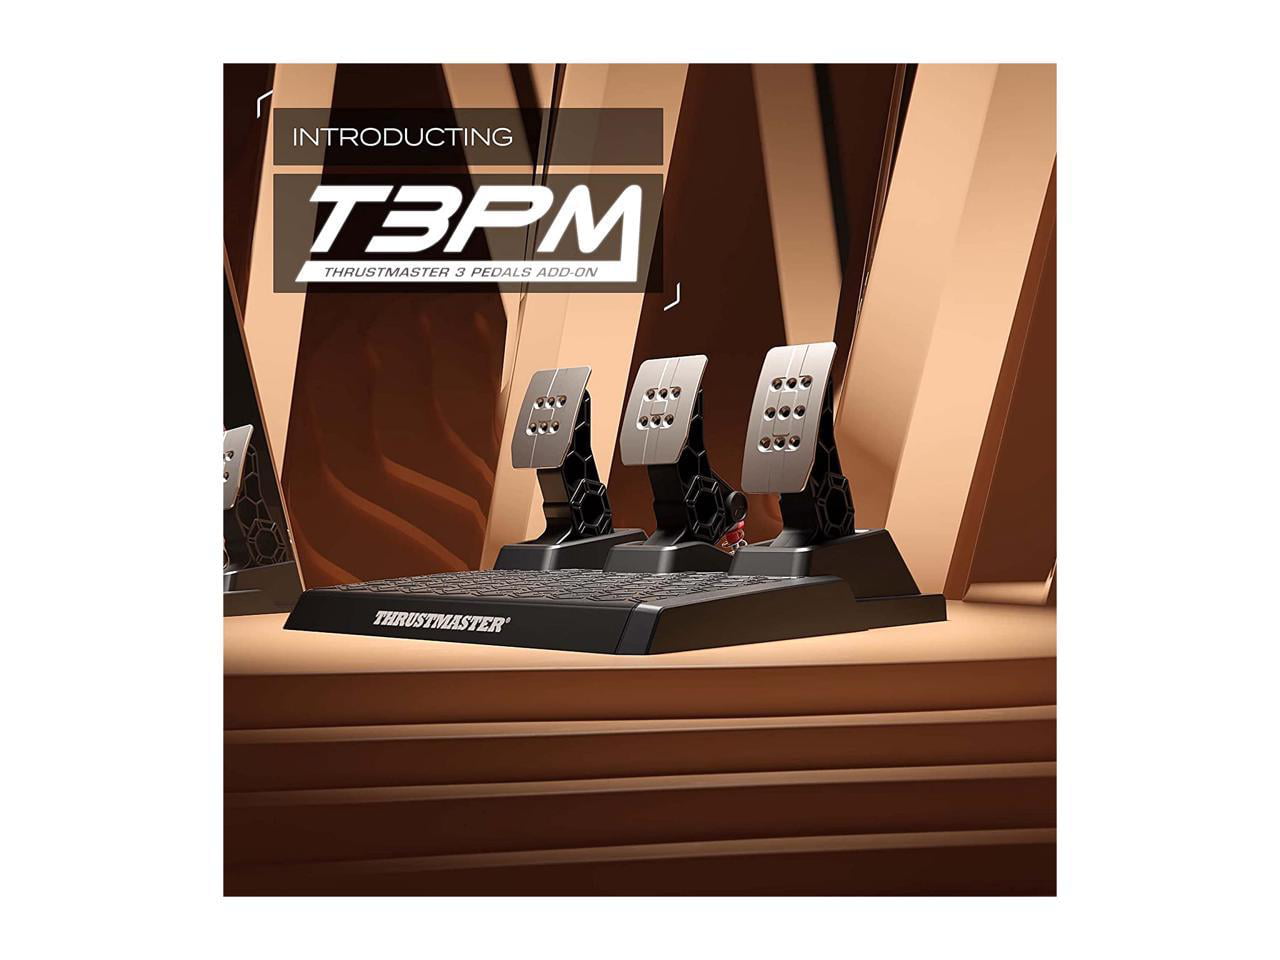 Pédalier THRUSTMASTER T3PM Magnetic PEDALS Add-on (4060210)